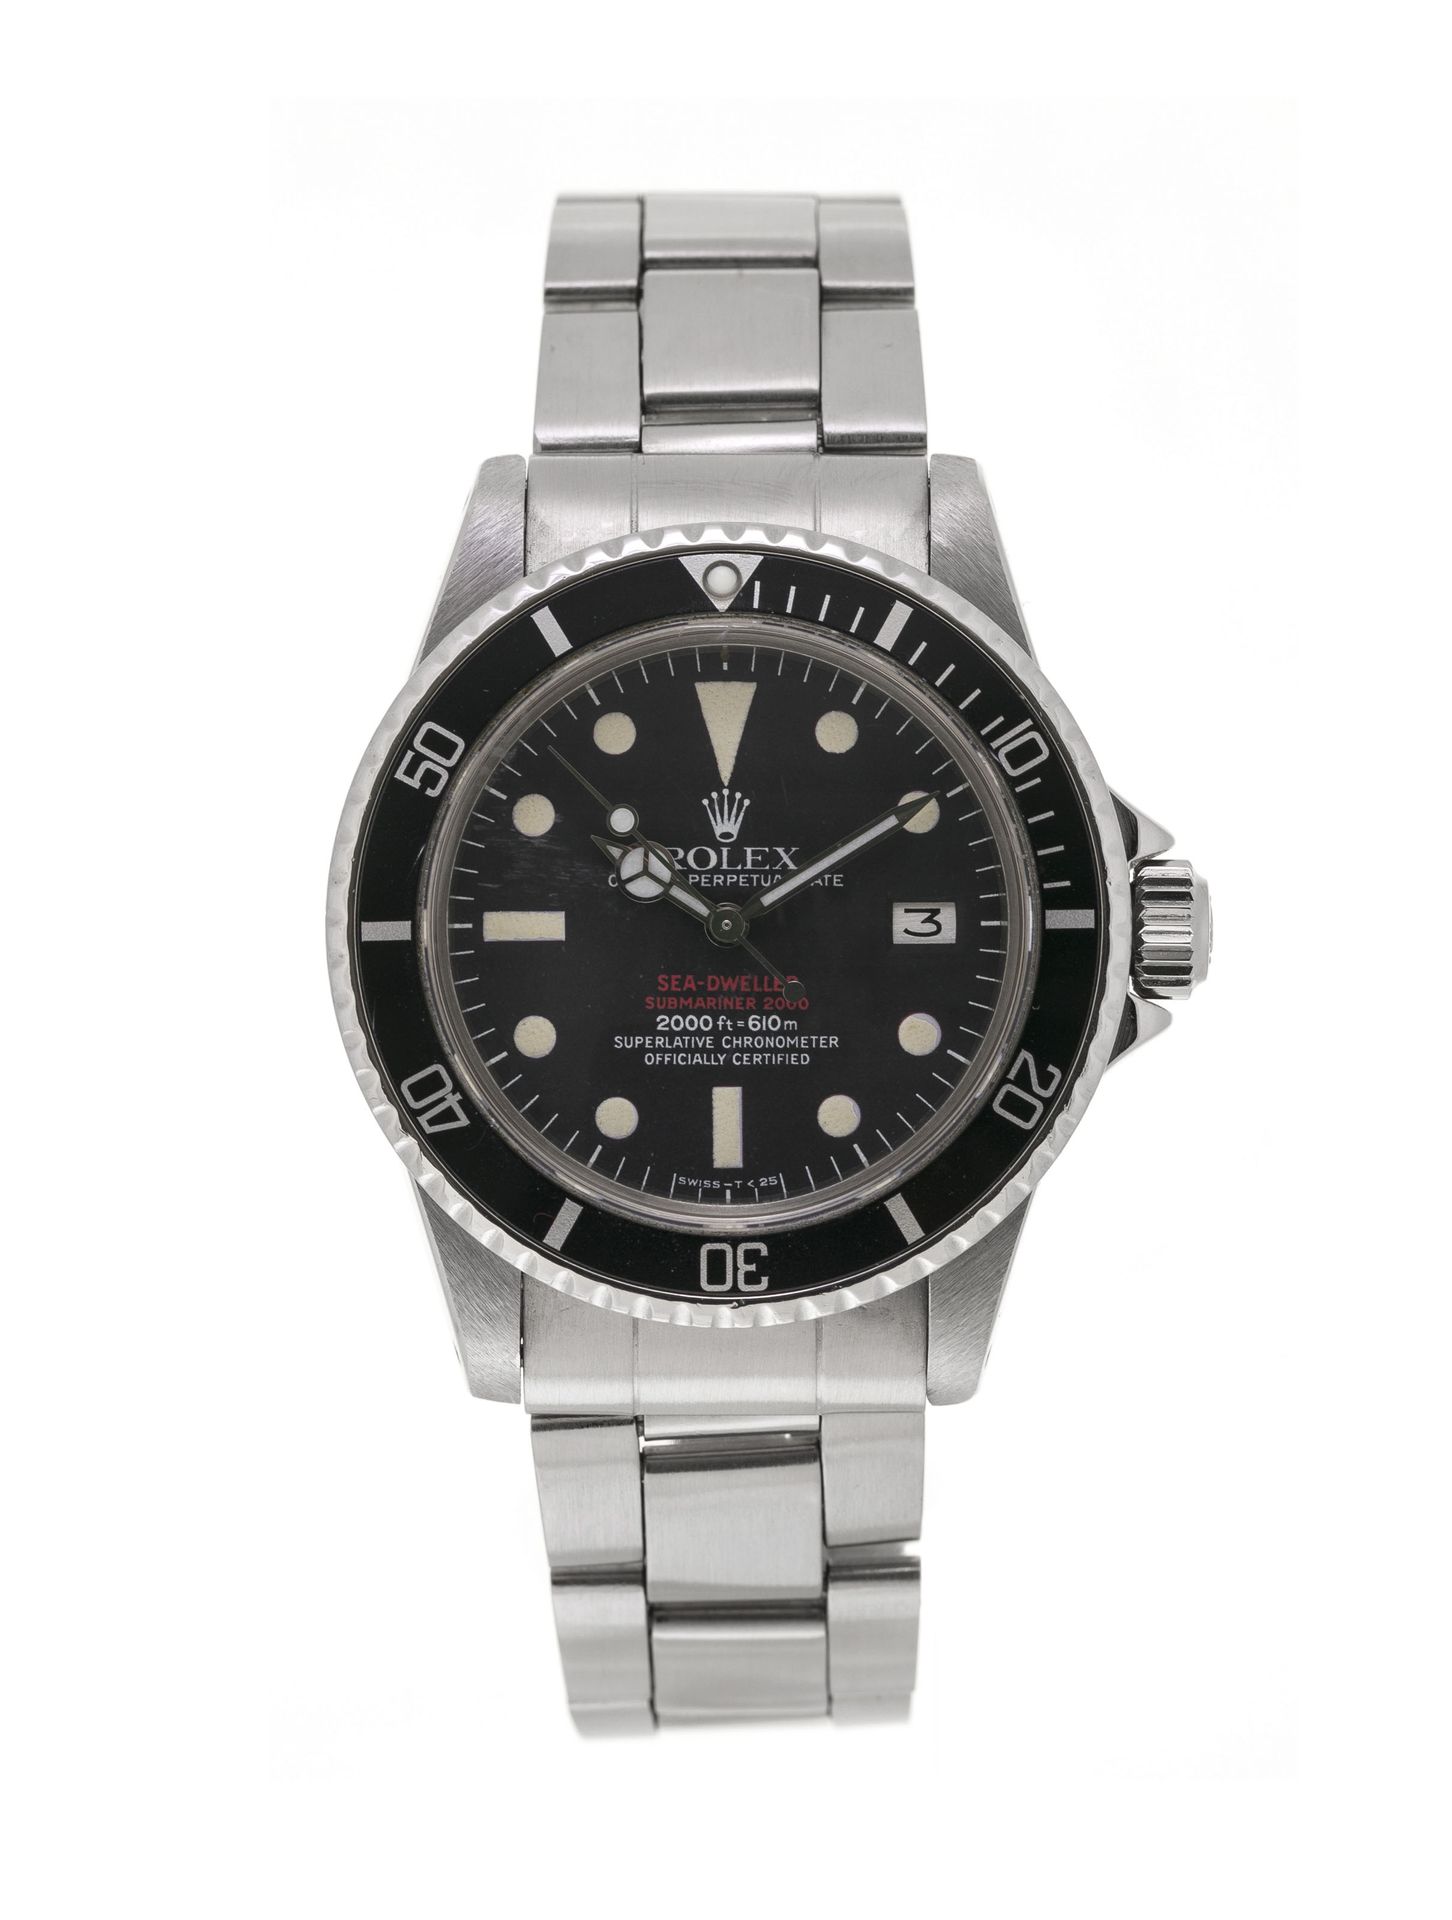 Null Rolex, Sea-Dweller, Submariner 2000, Double Red, Mark IV, réf. 1665, montre&hellip;